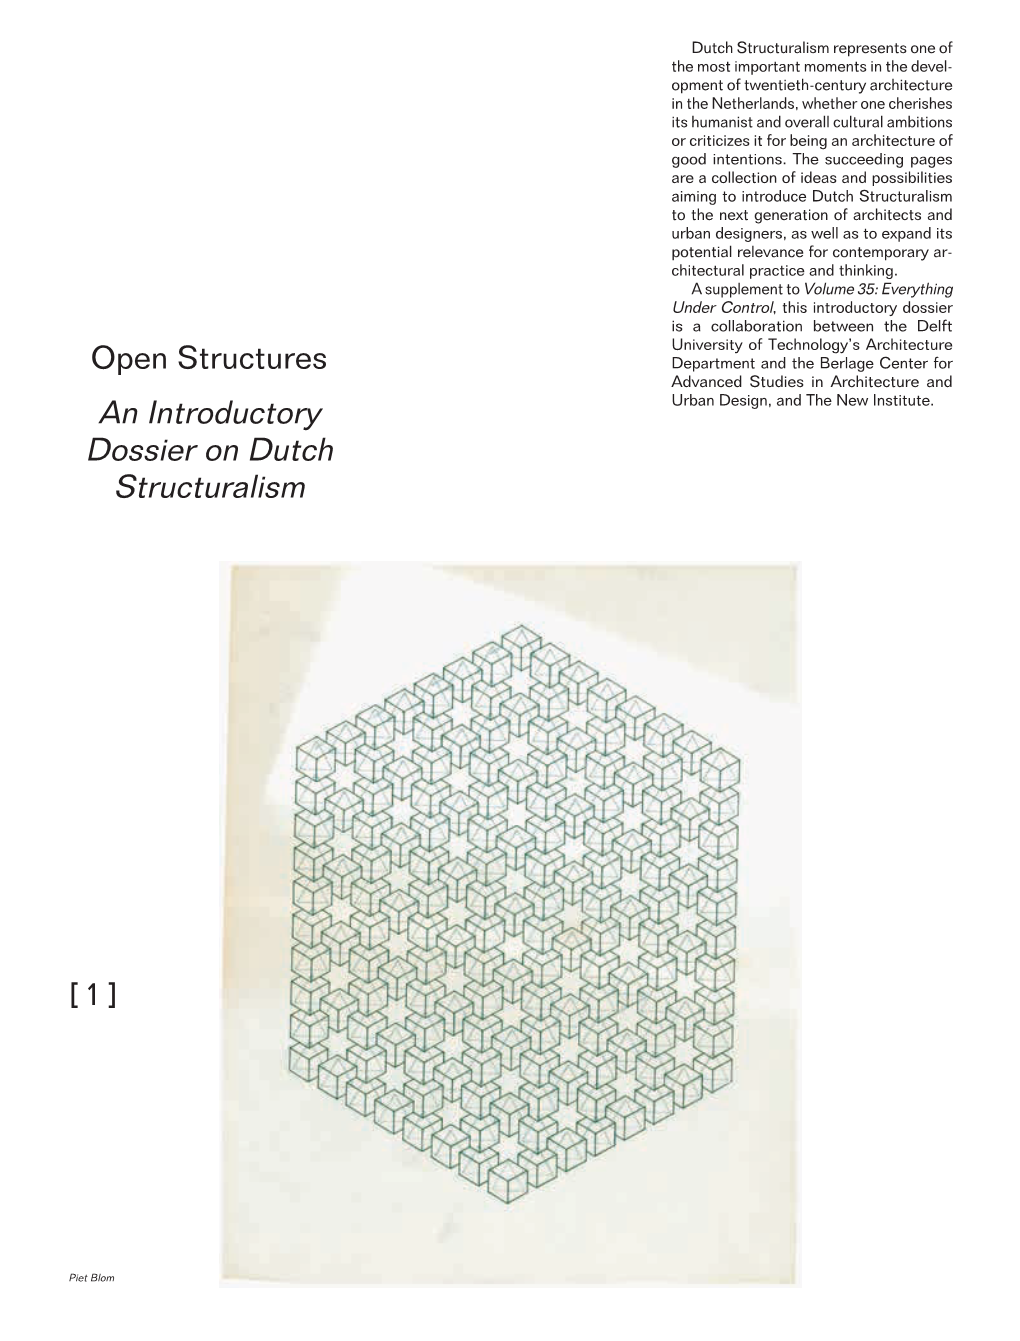 Open Structures an Introductory Dossier on Dutch Structuralism [